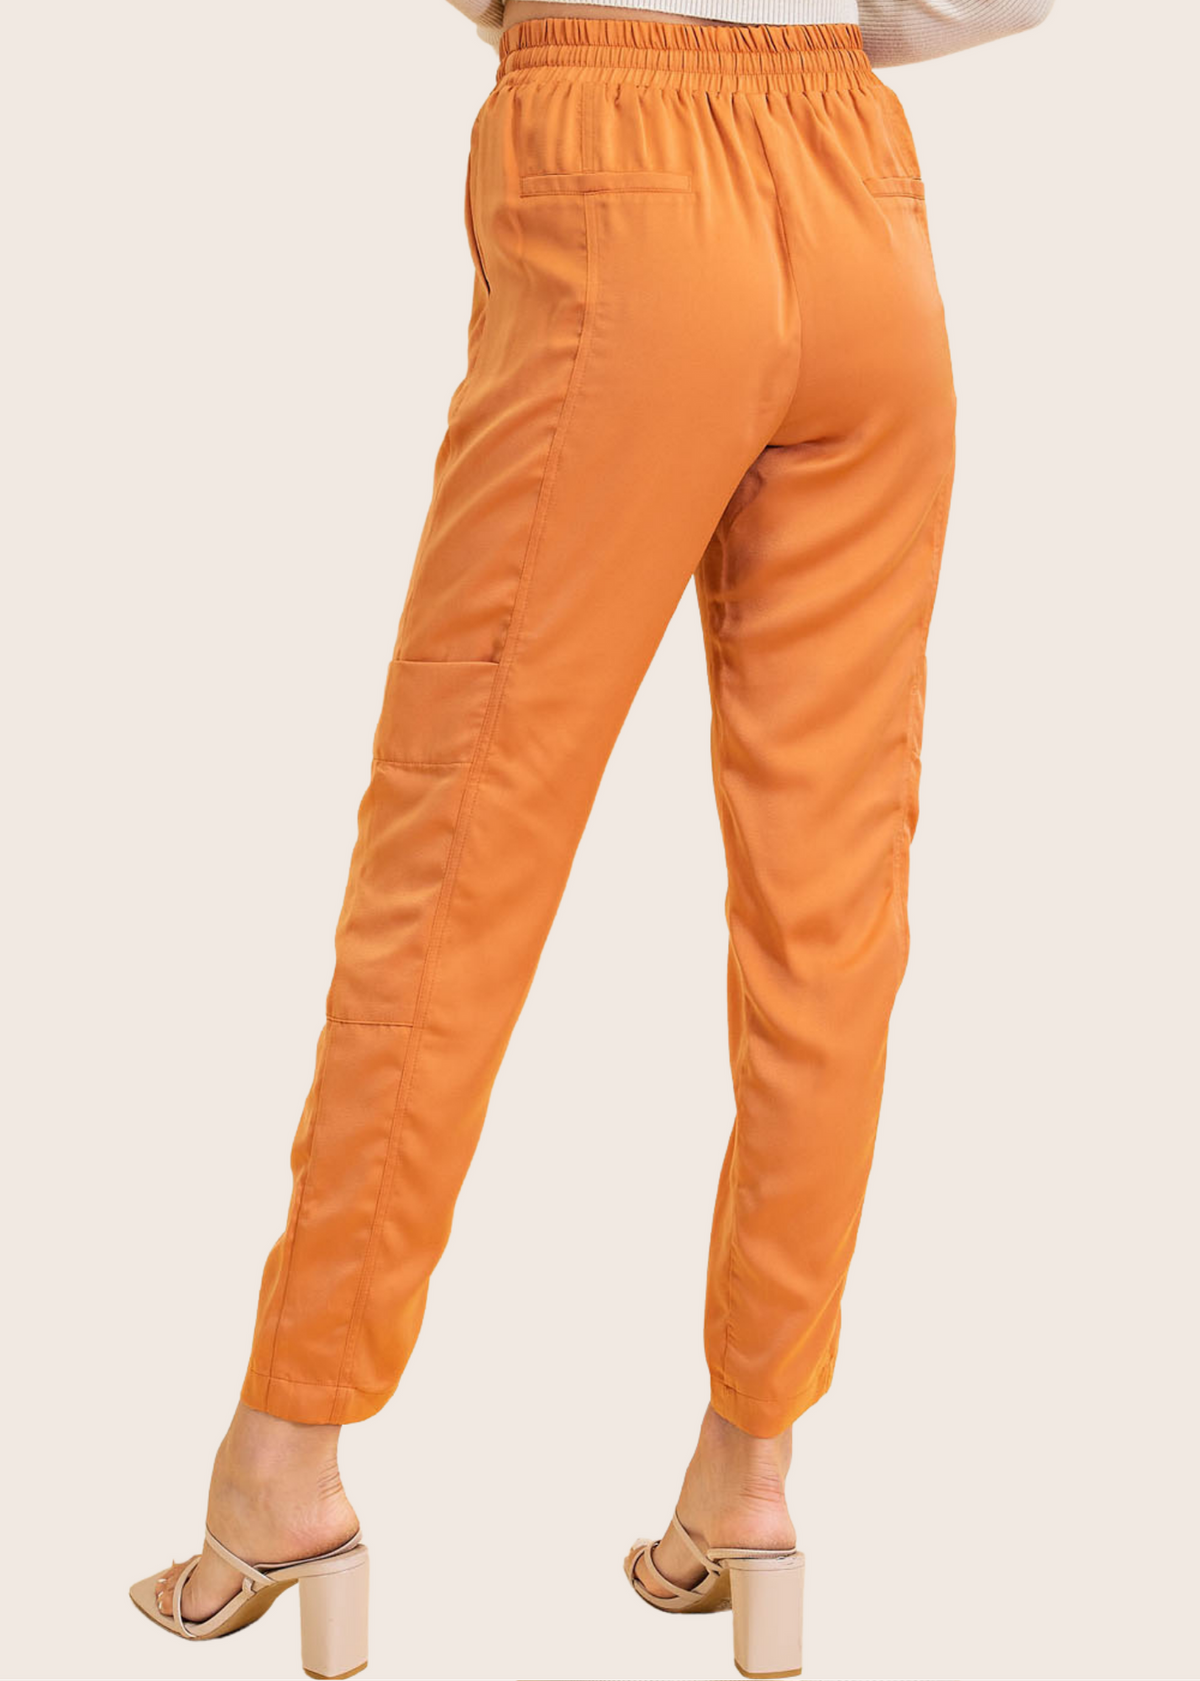 Tangerine Silky Cargo Pants/Trousers with Drawstring